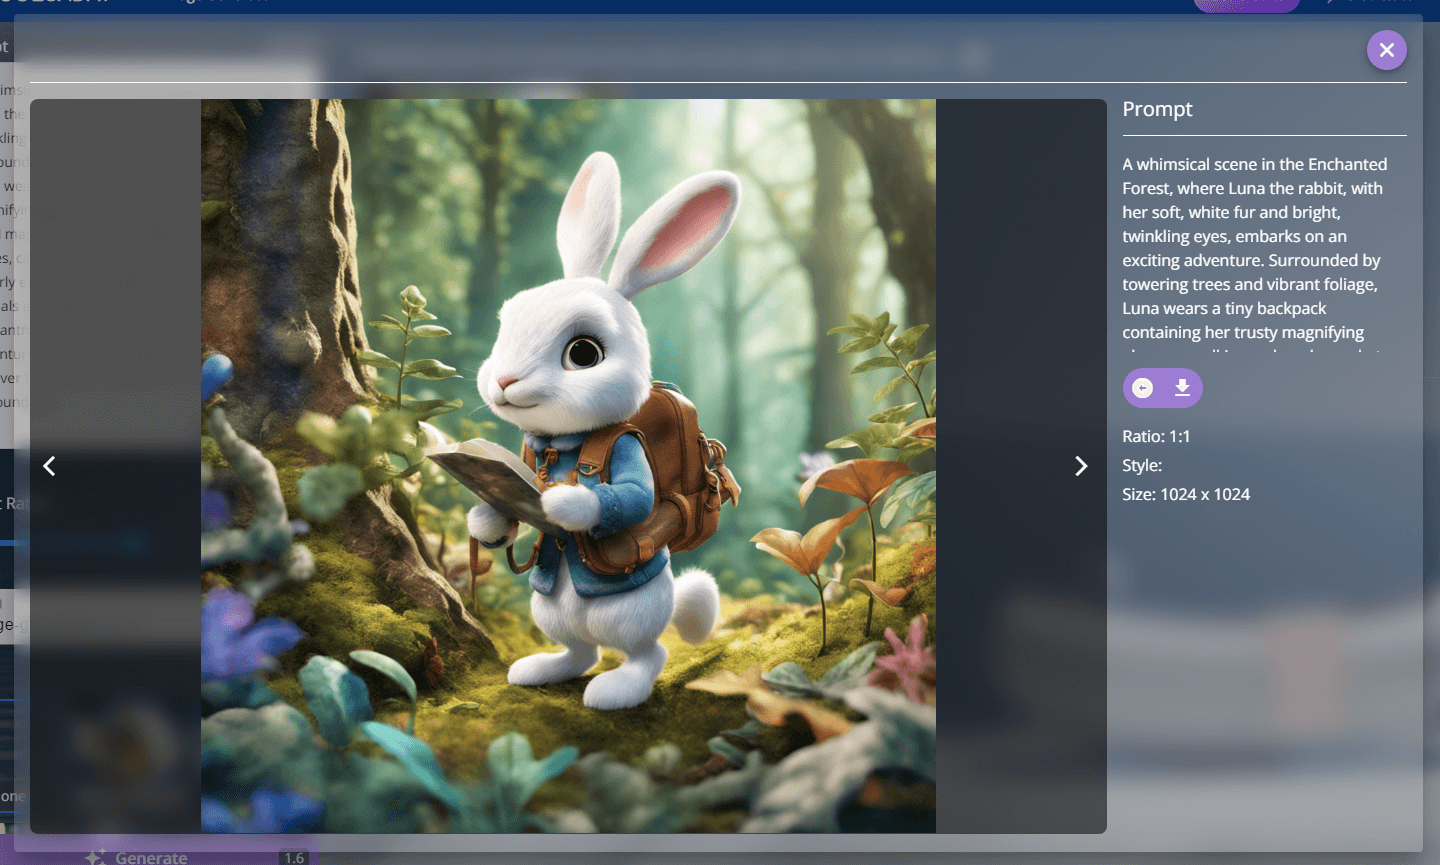 An AI generated image of a rabbit character in a woodland scene